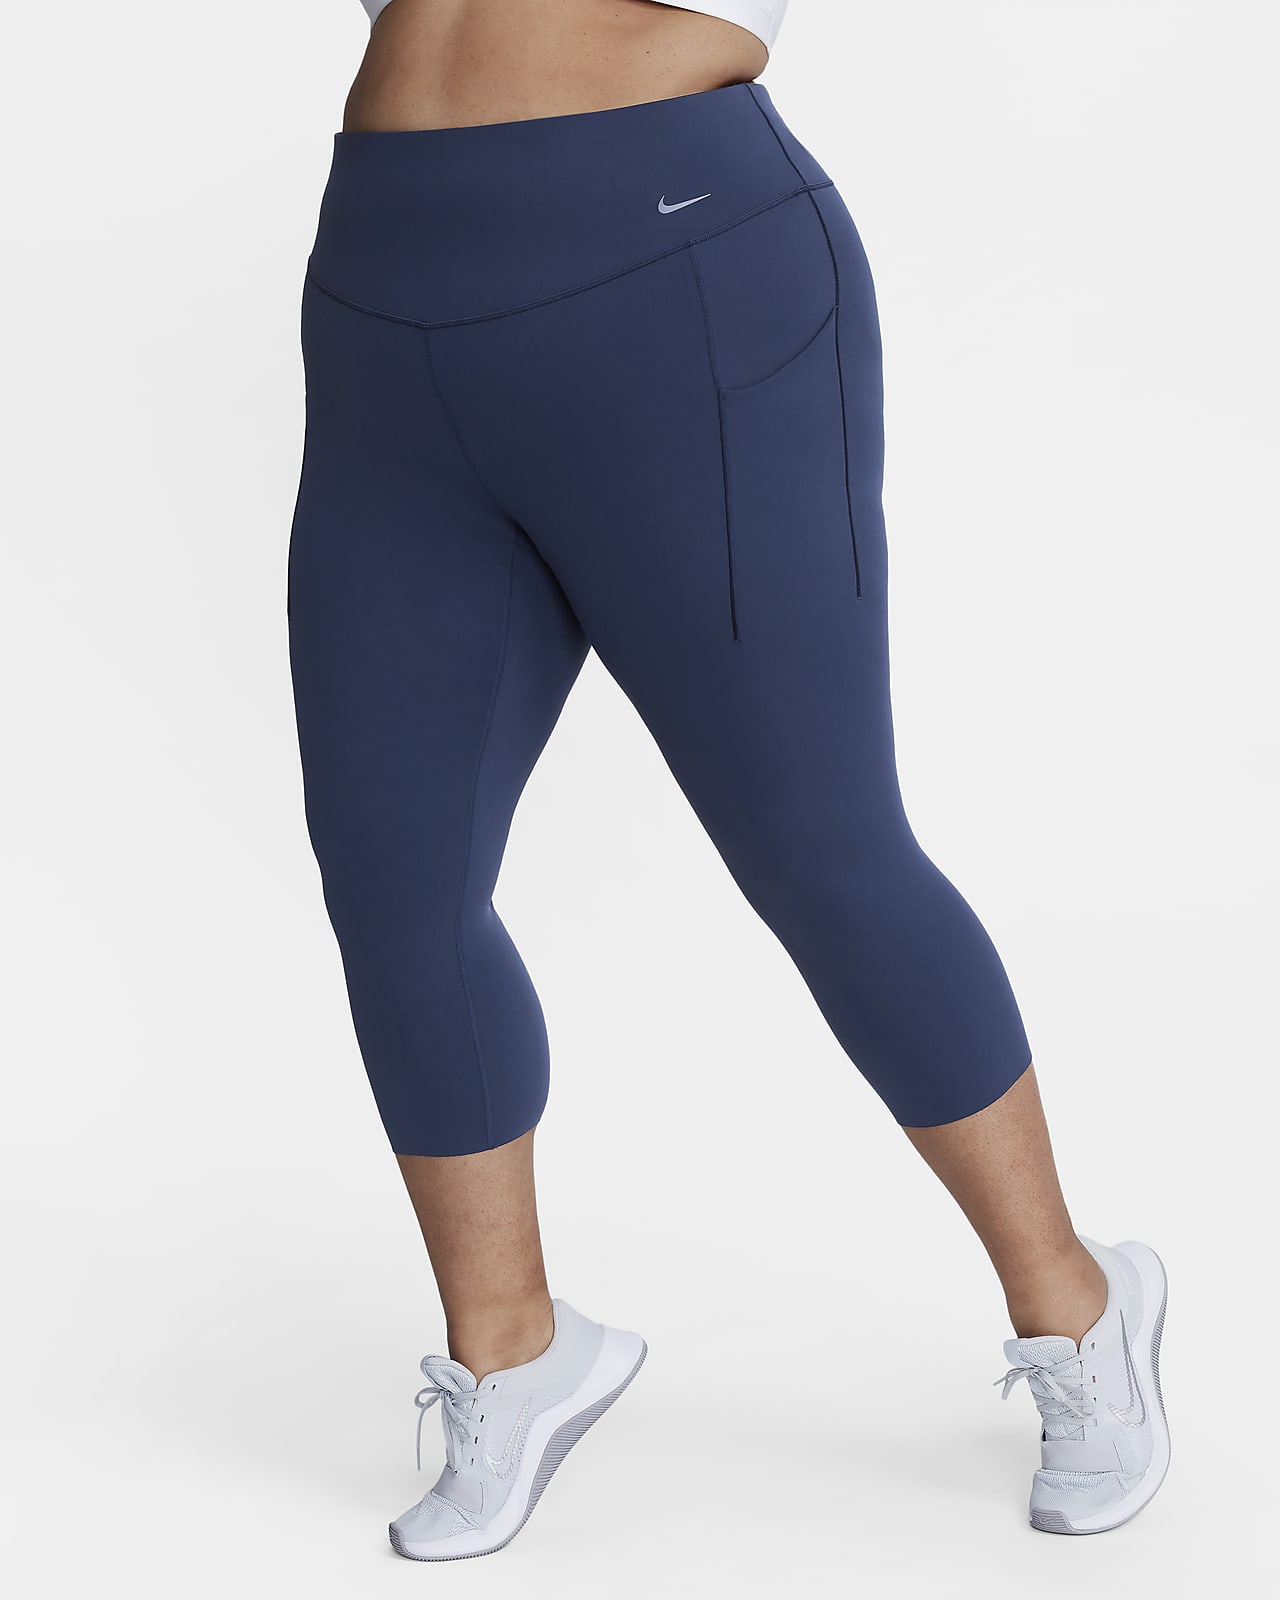 TomboyX Workout Leggings, 7/8 Length High Waisted Active Yoga Pants With  Pockets For Women, Plus Size Inclusive (XS-6X) Embrace The Curve Small